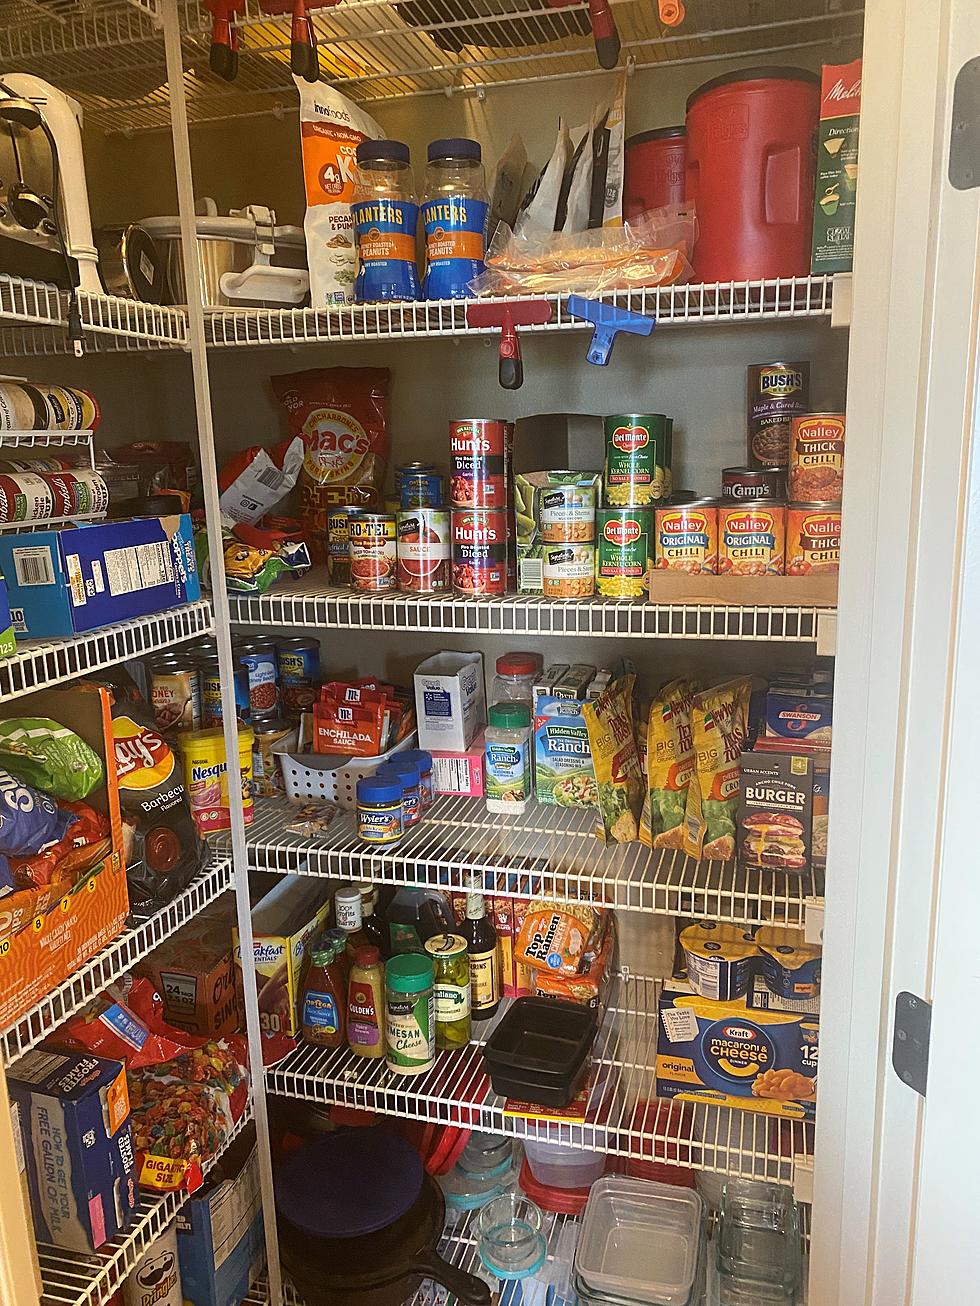 Billings, What Does Your Pantry Look Like? Are You Stocked Up?